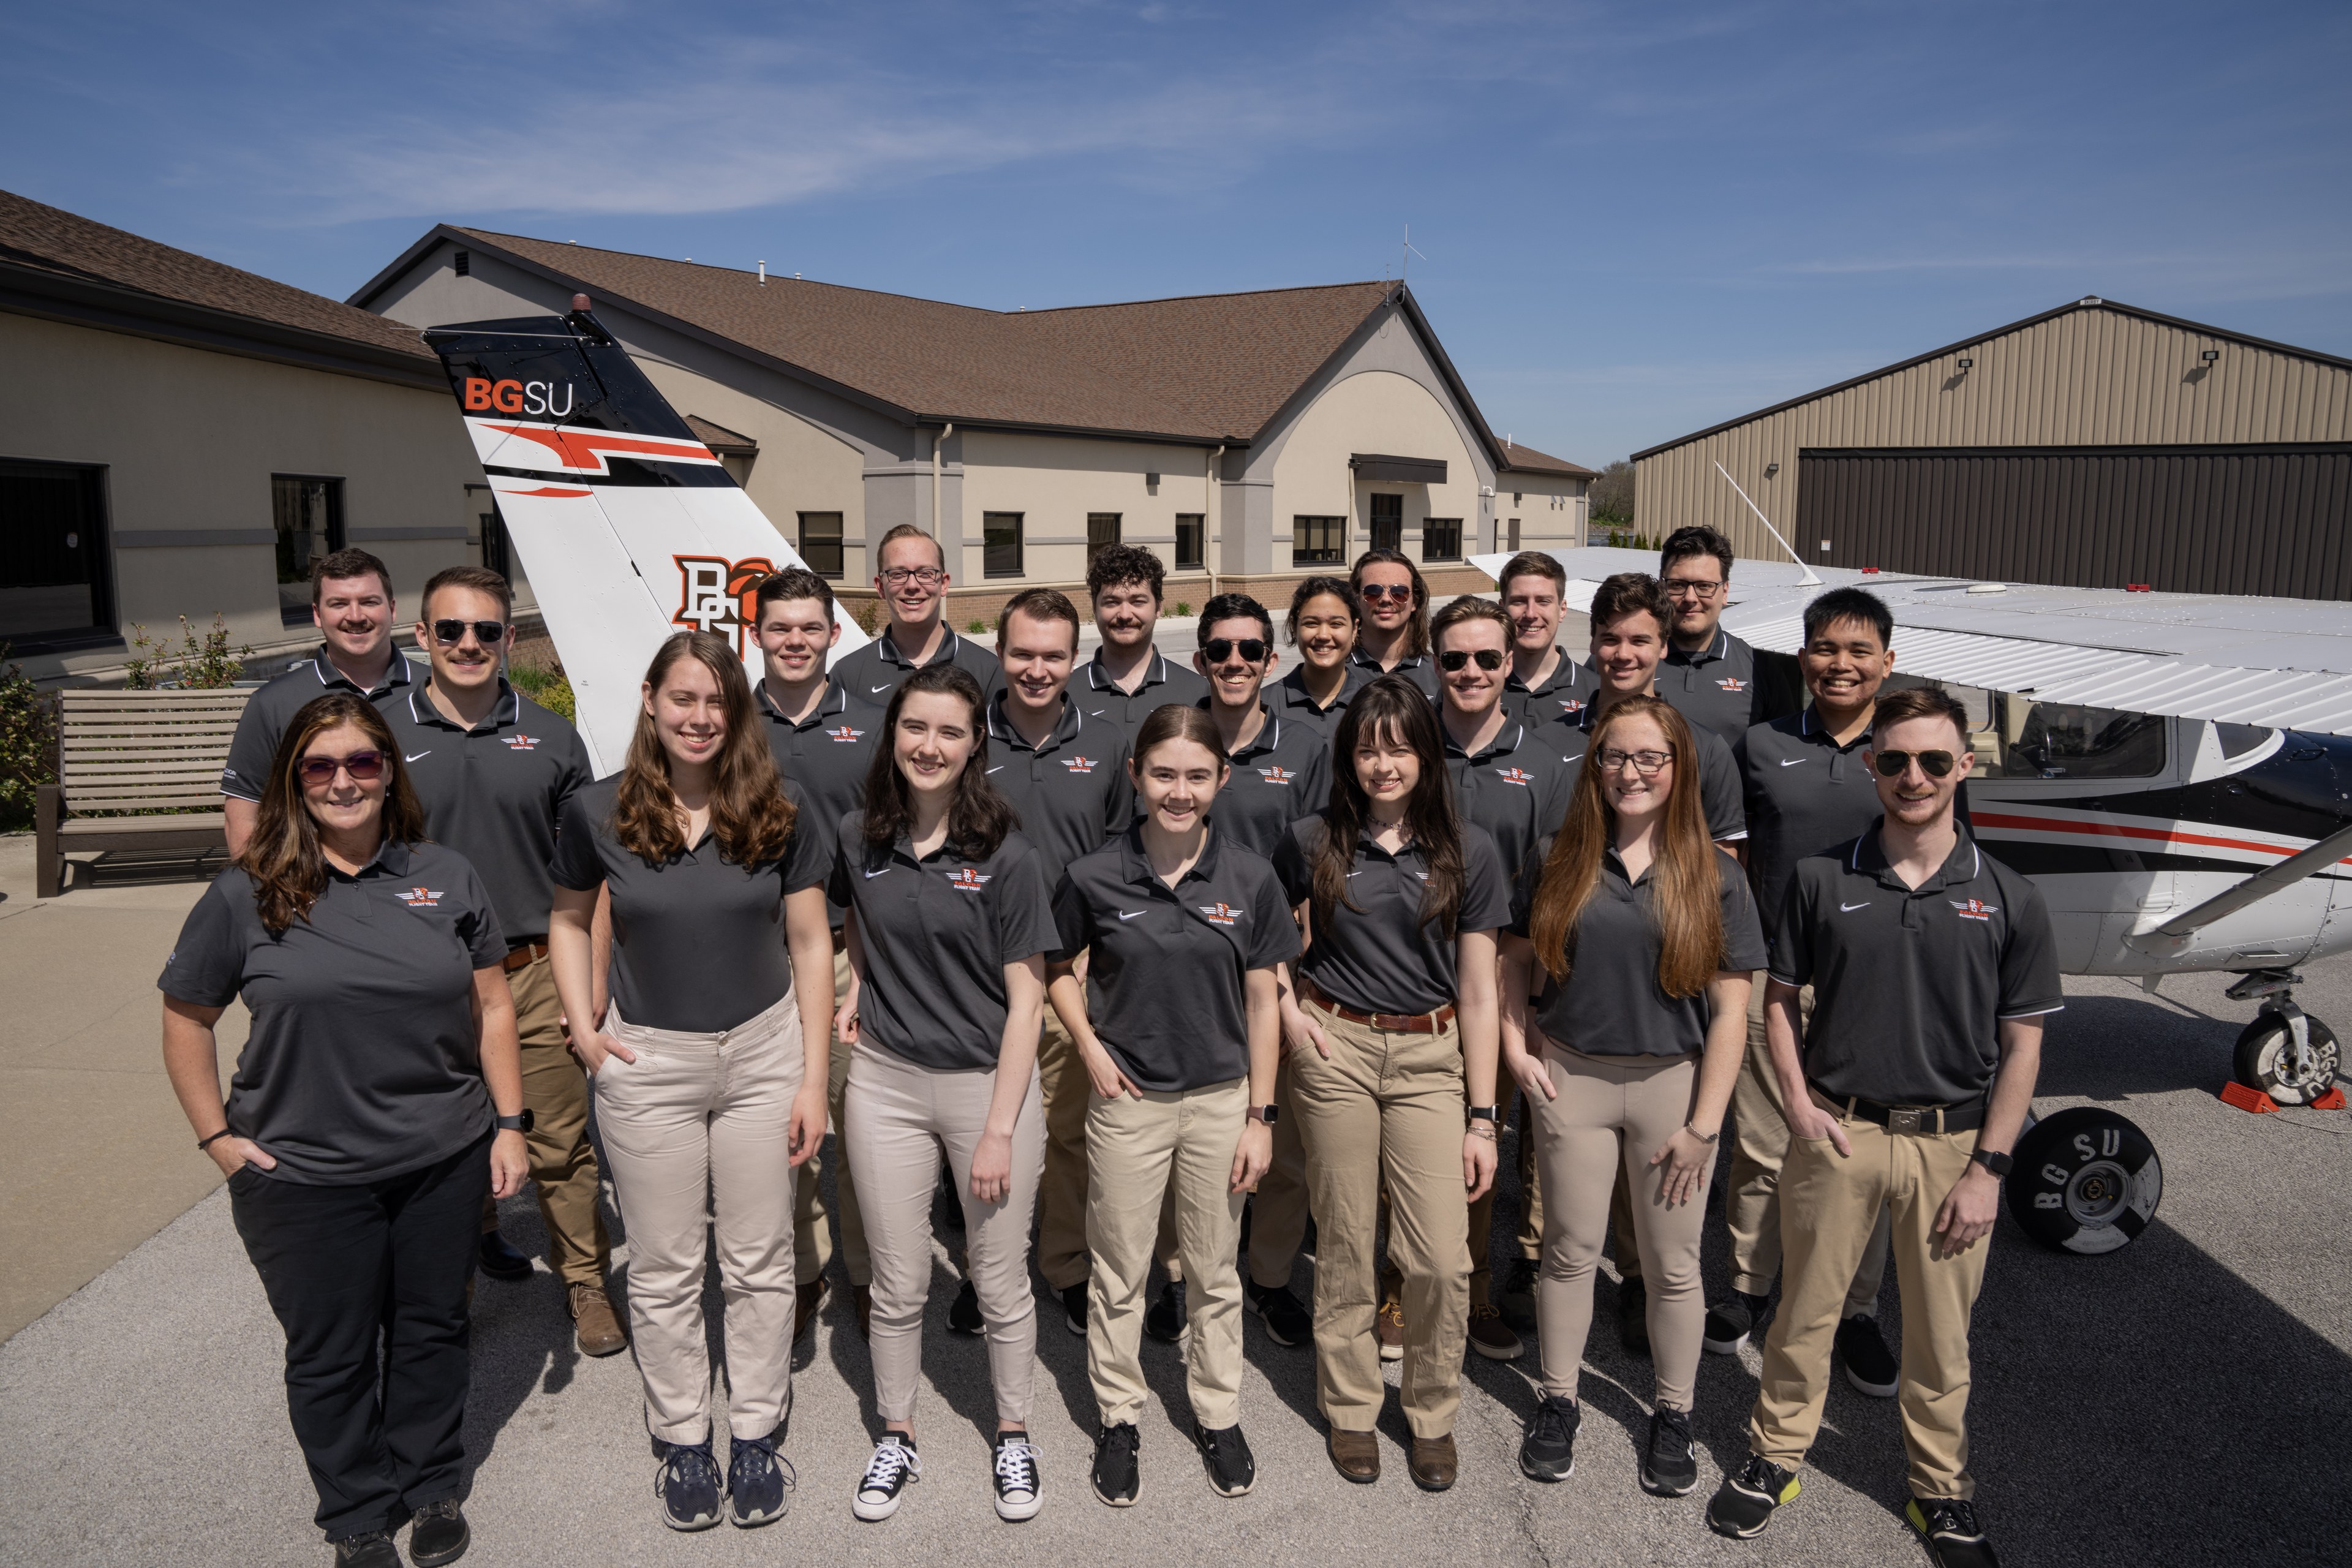 A group of BGSU students stand in front of an airplane.